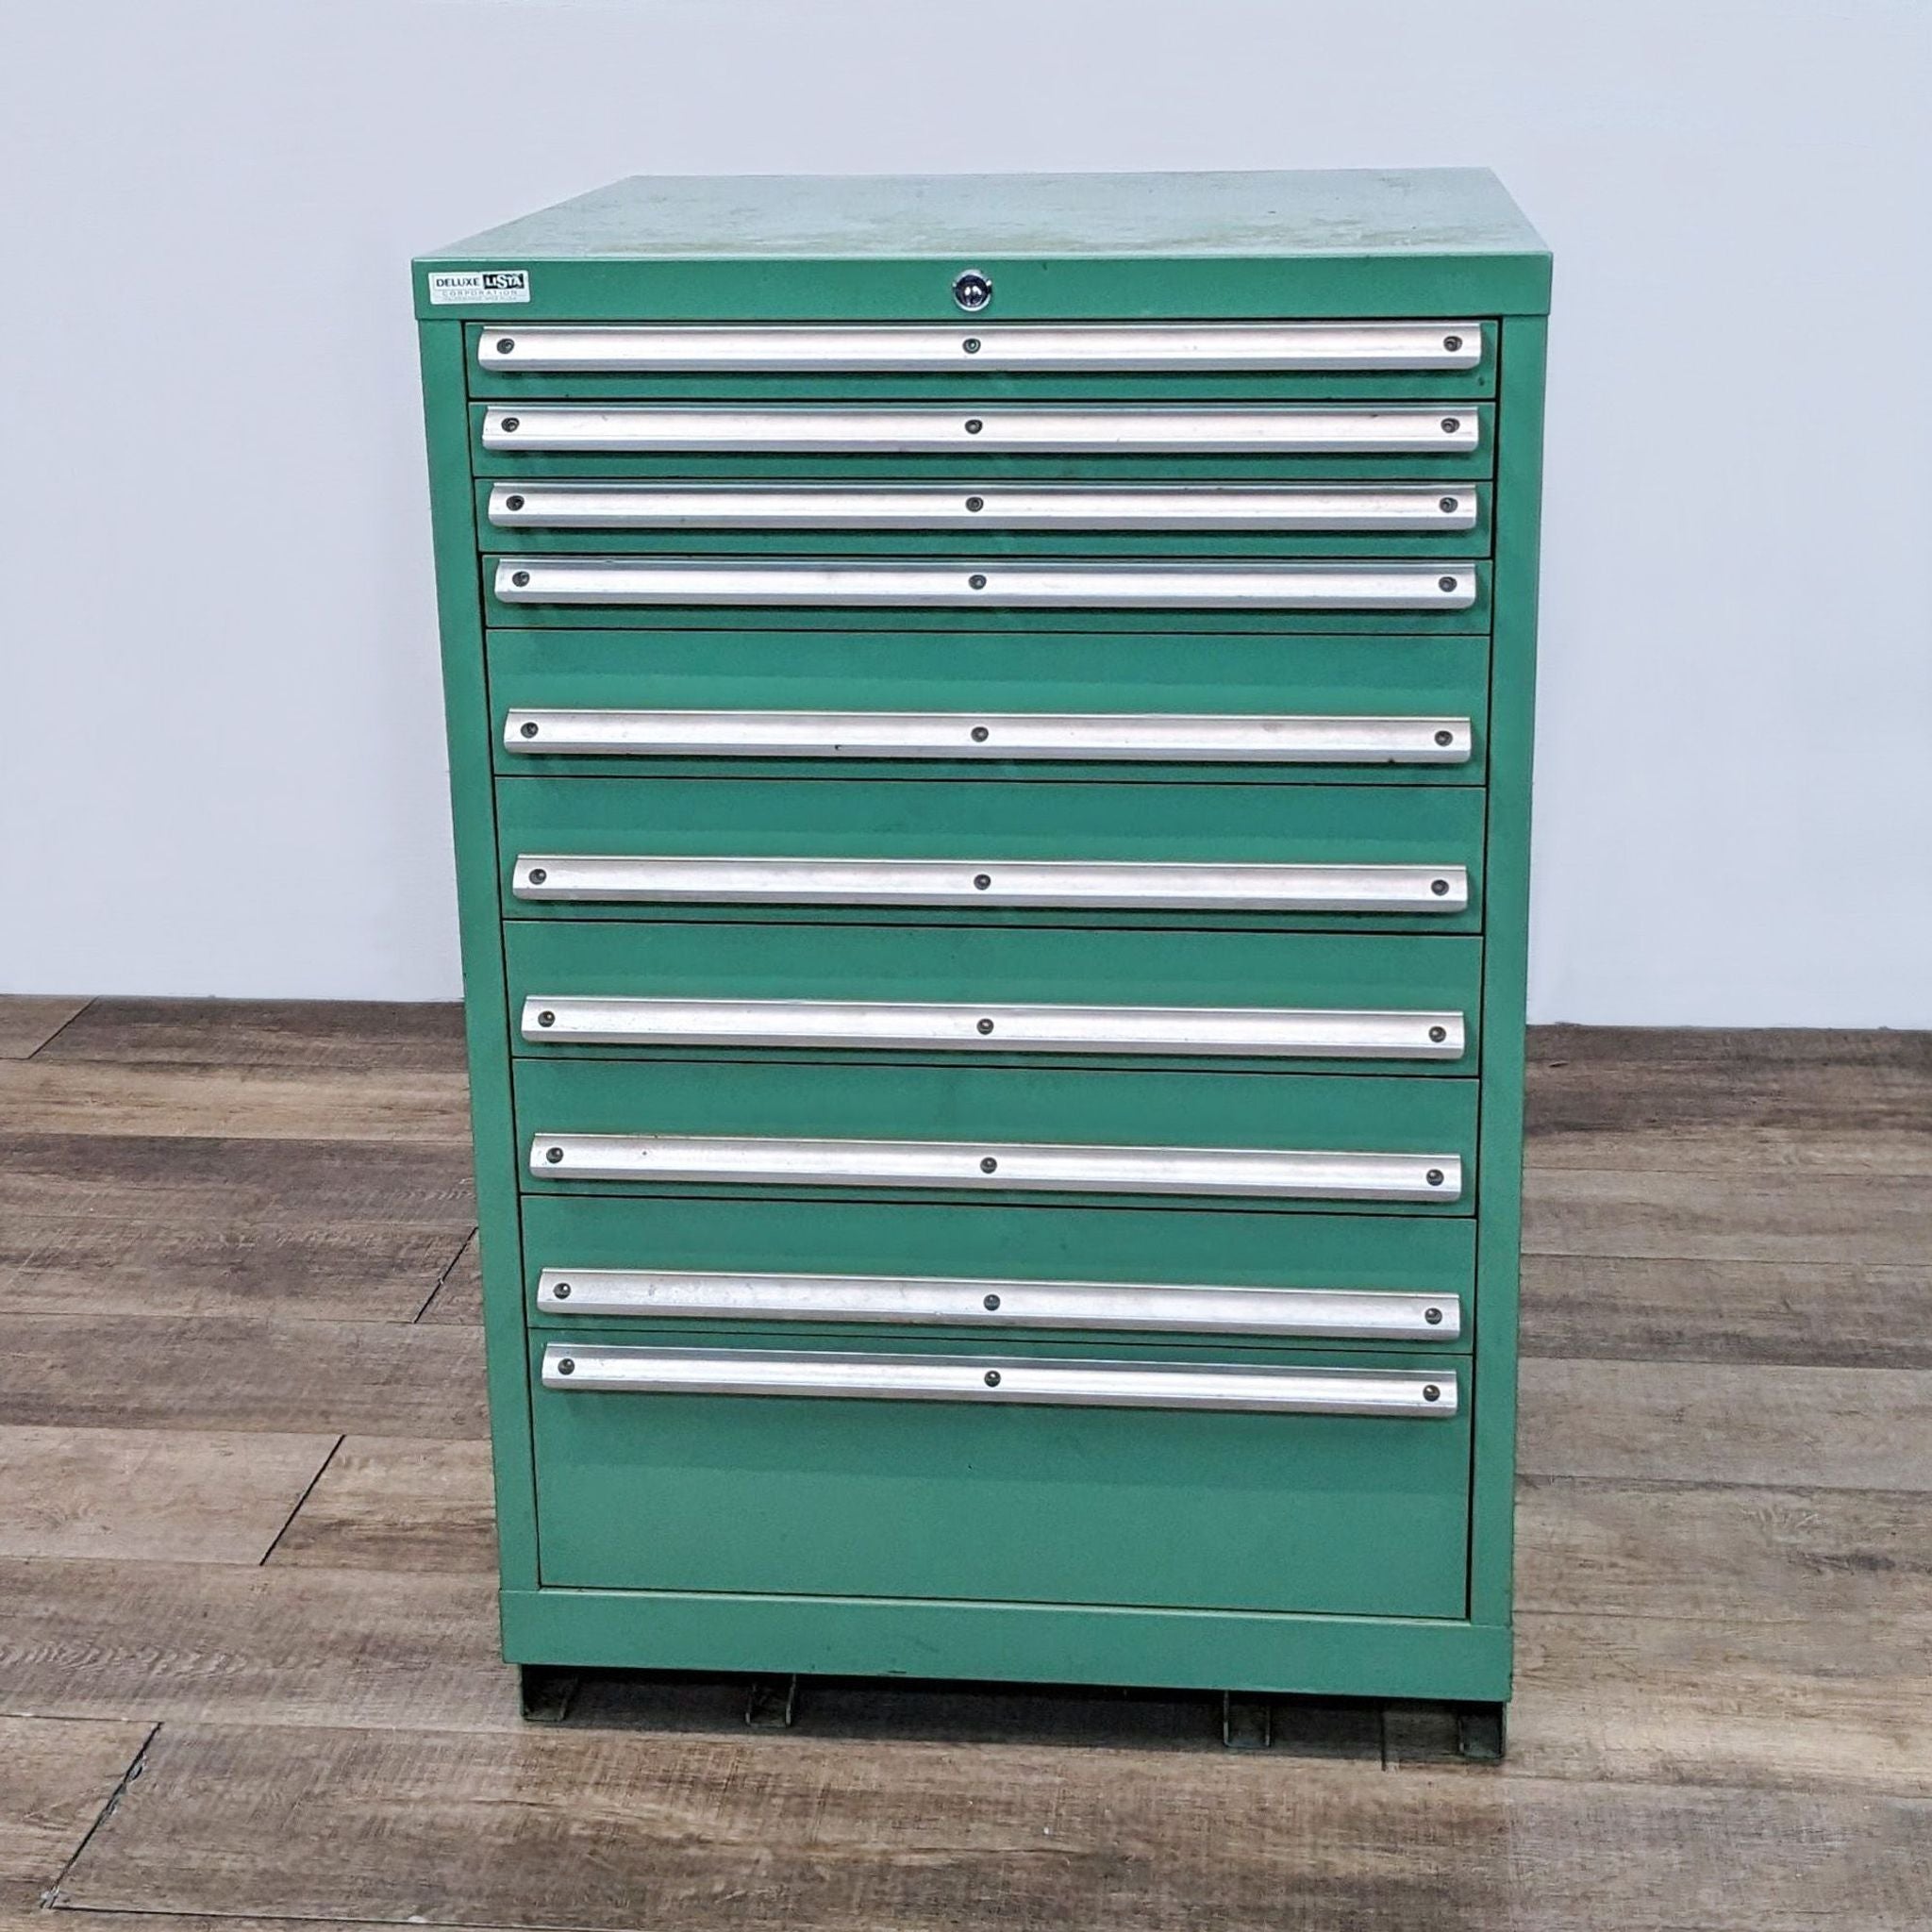 Alt text 1: Green Lista tool storage cabinet, closed drawers, sturdy metal design, multiple sized drawers, ideal for tool organization.